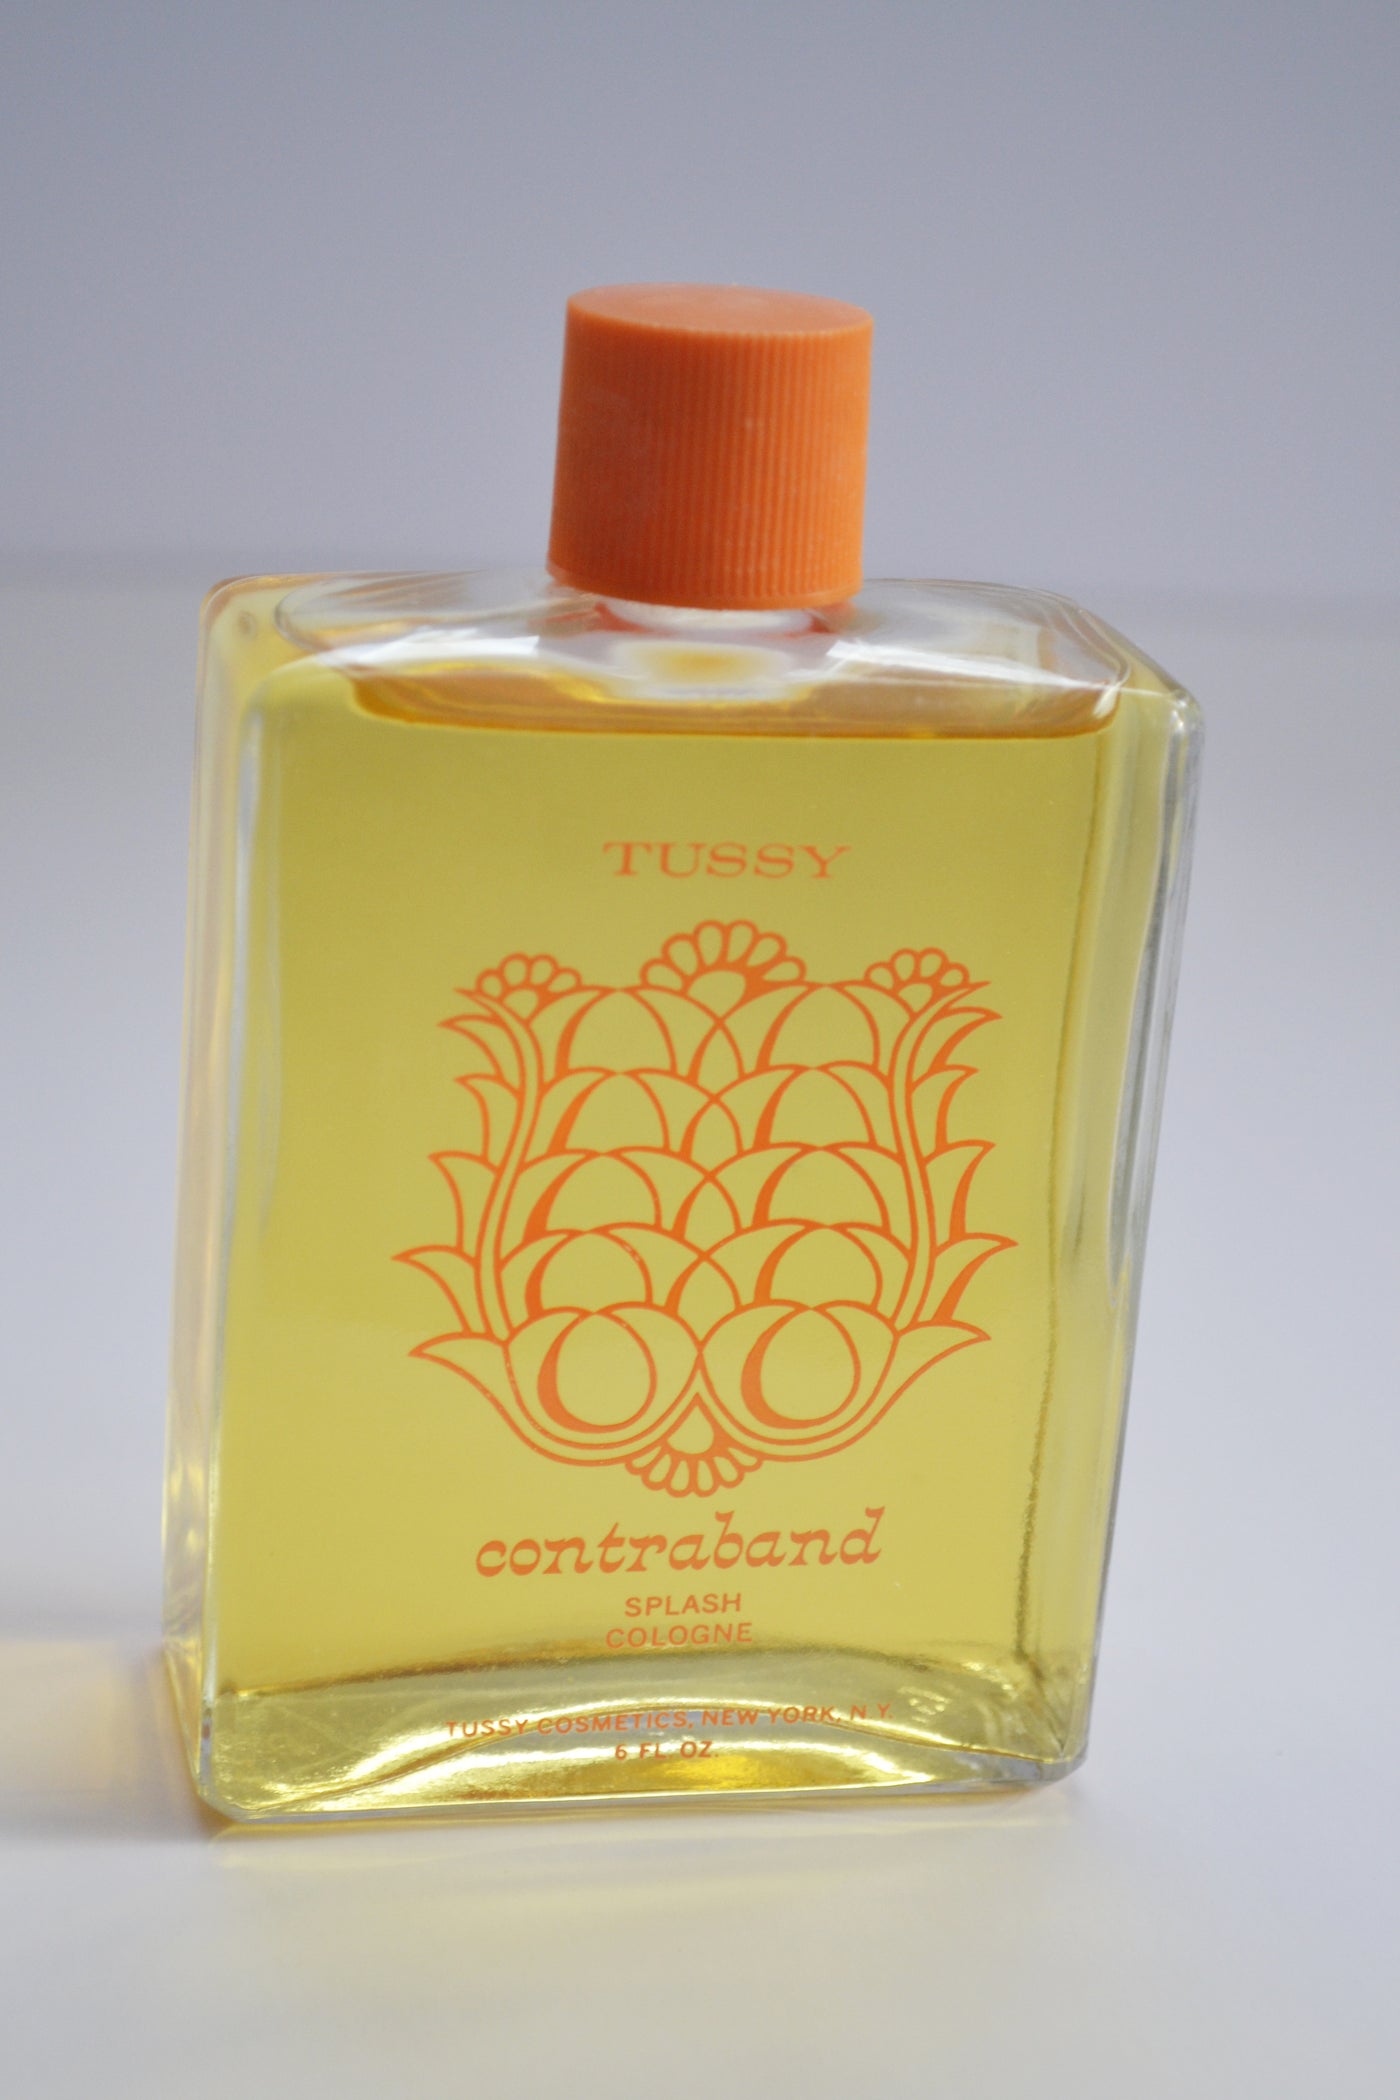 Vintage Contraband Cologne By Tussy 